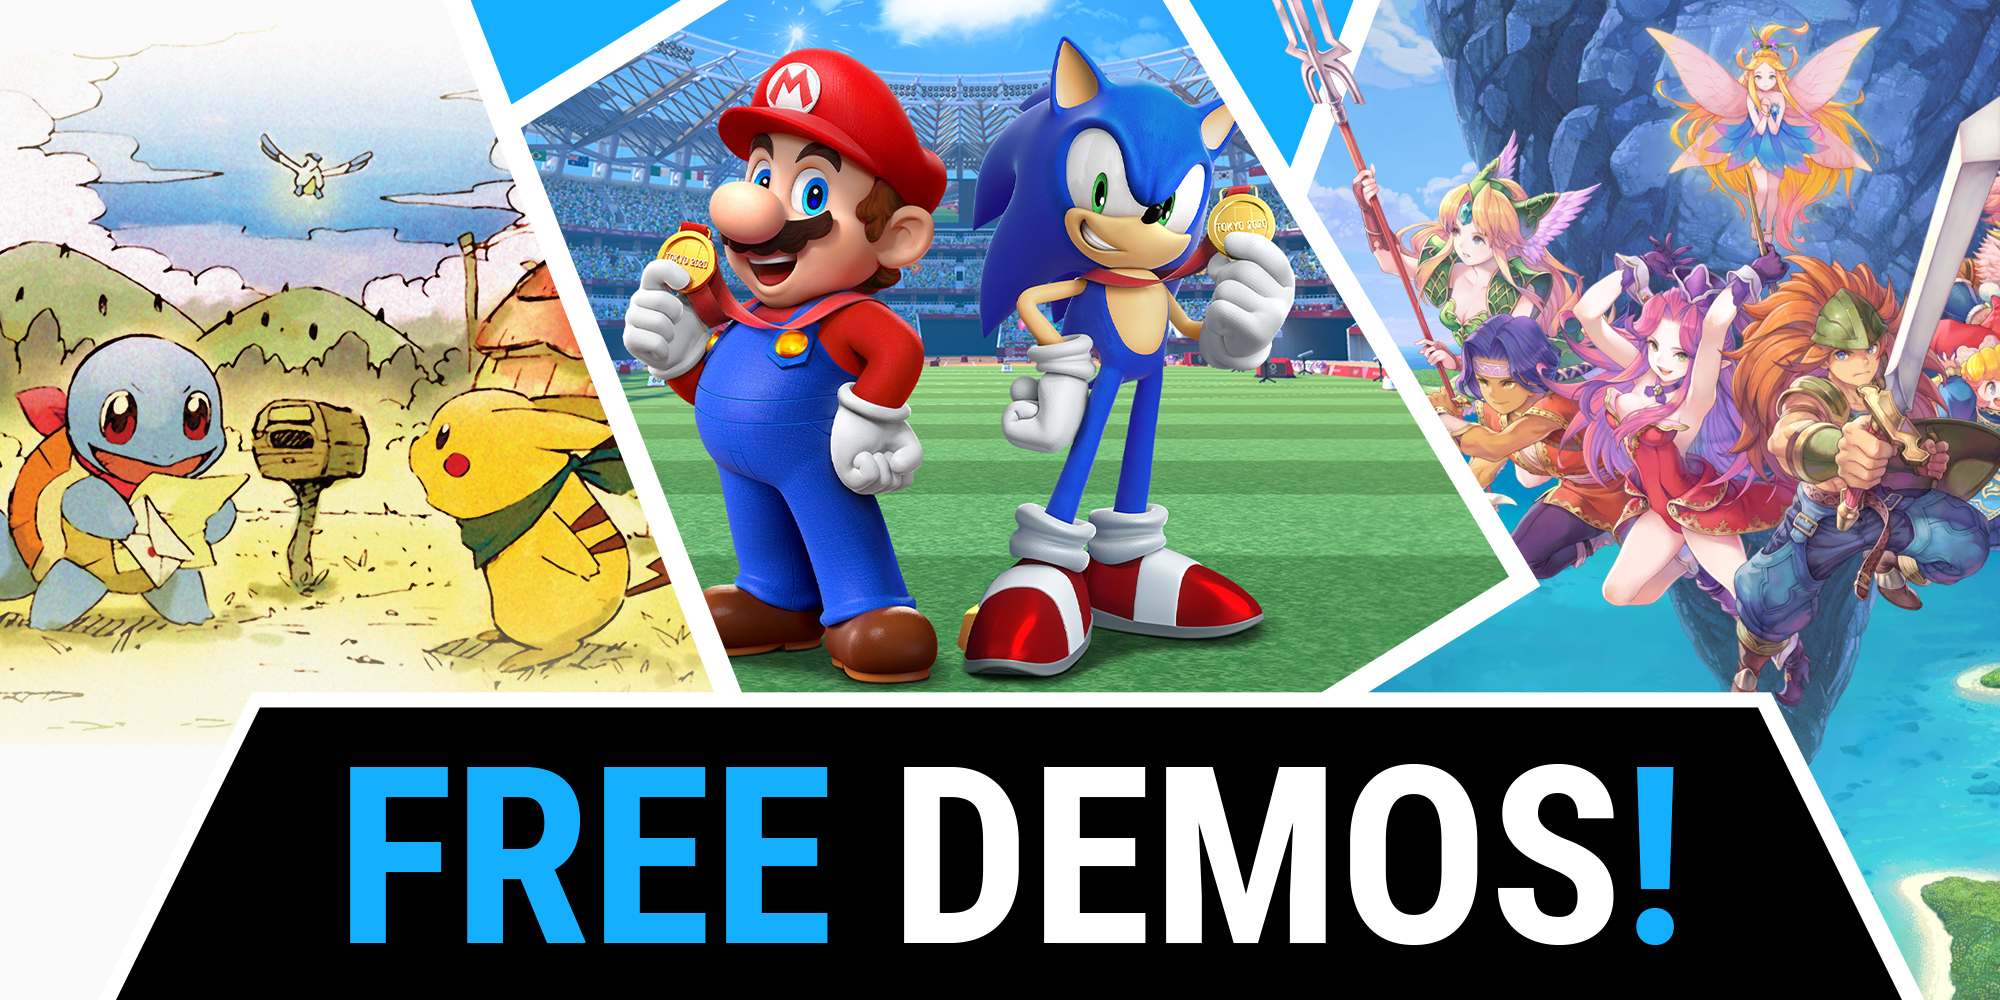 how to get free games on nintendo eshop